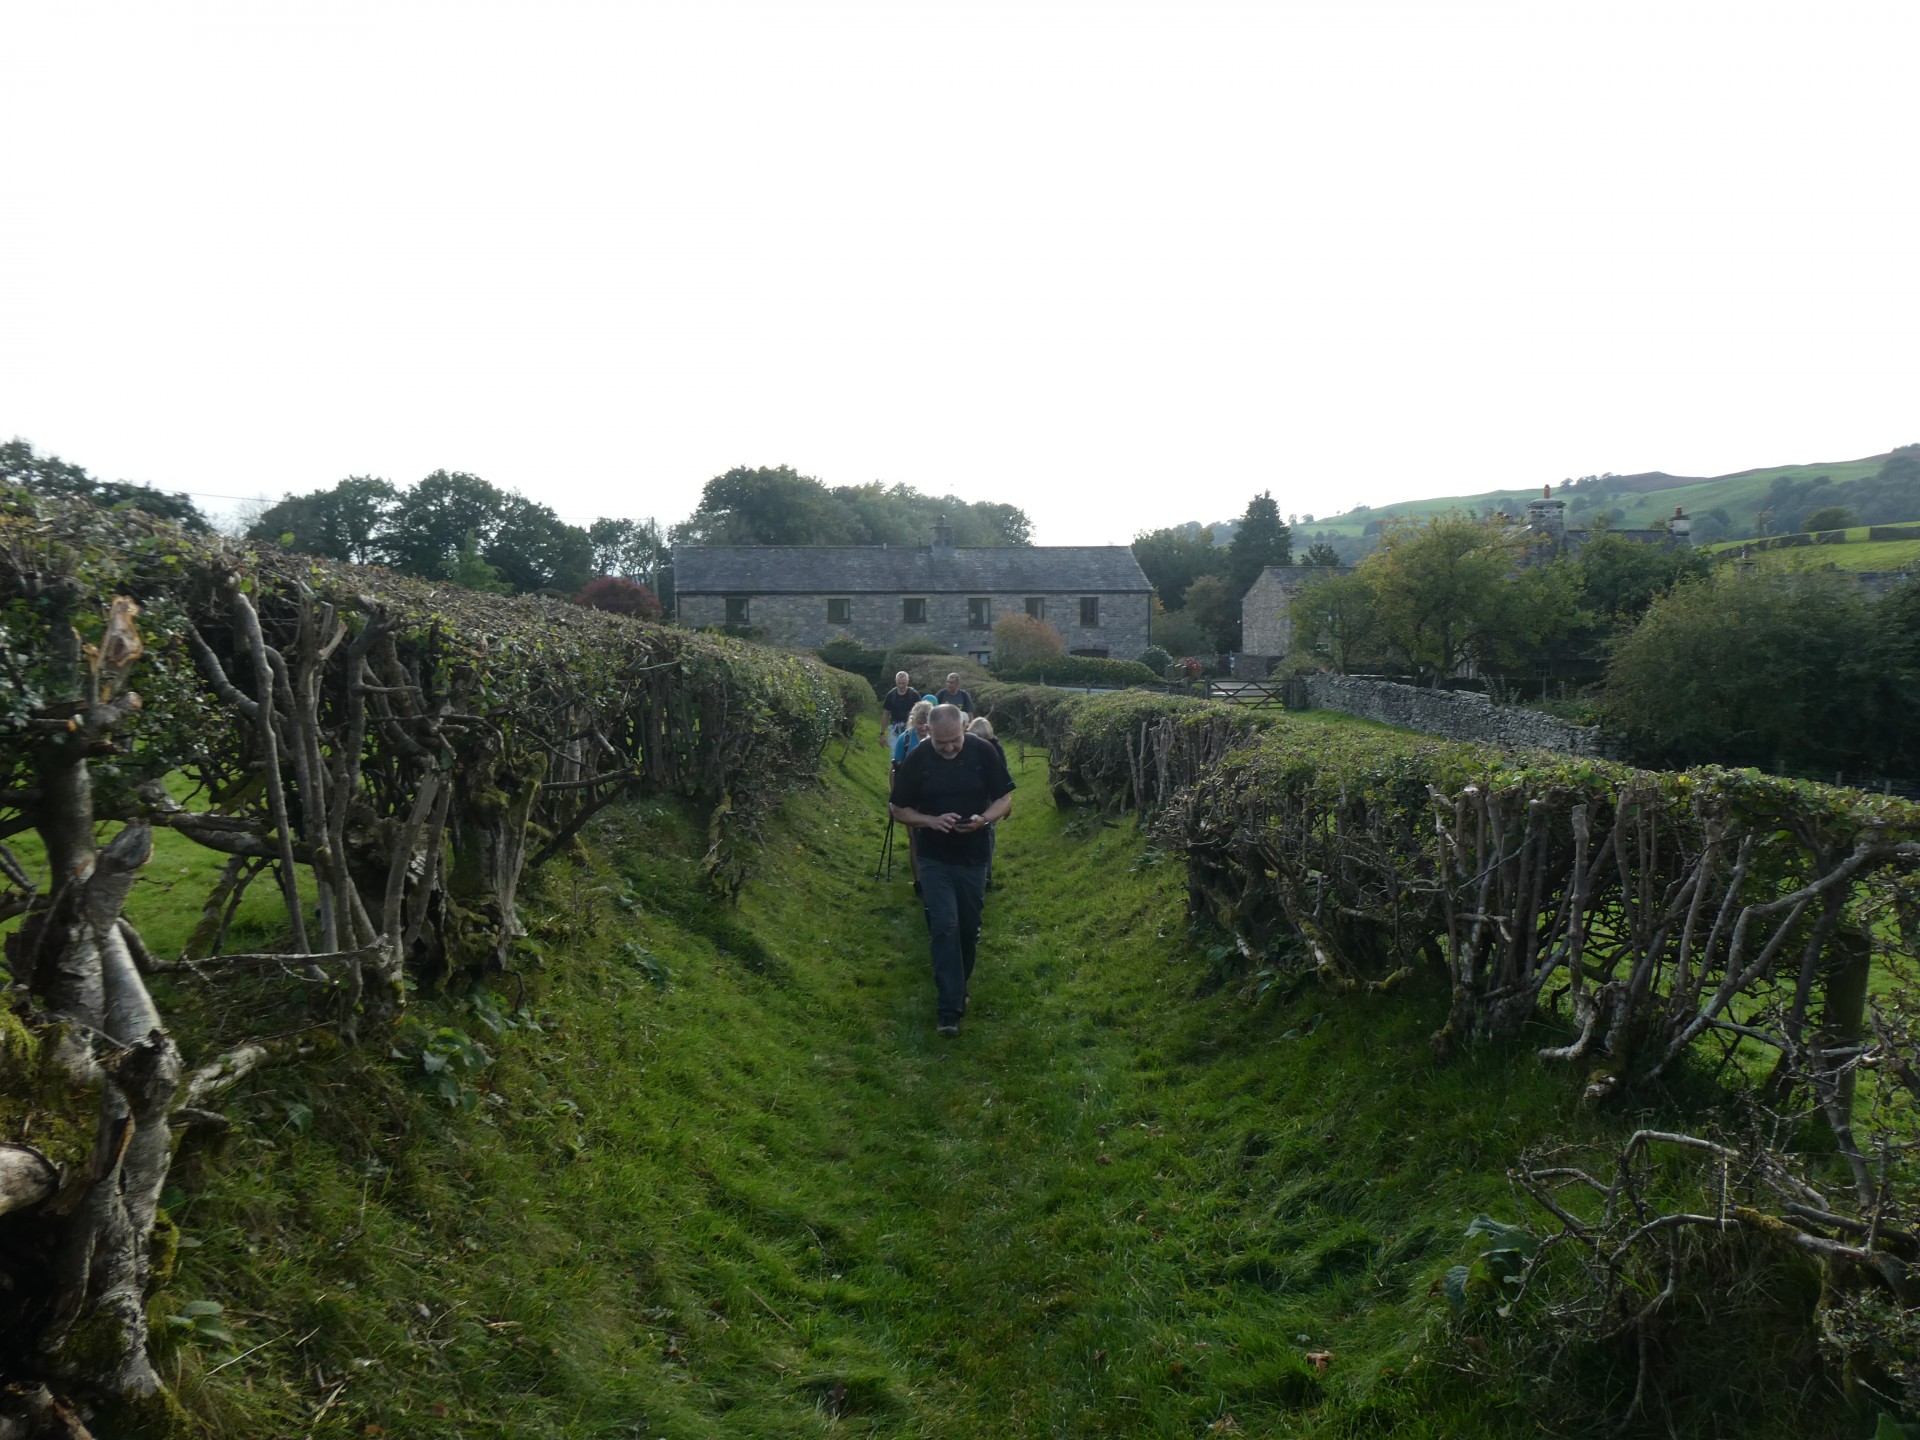 The Dales Way includes some splendid Green Lanes